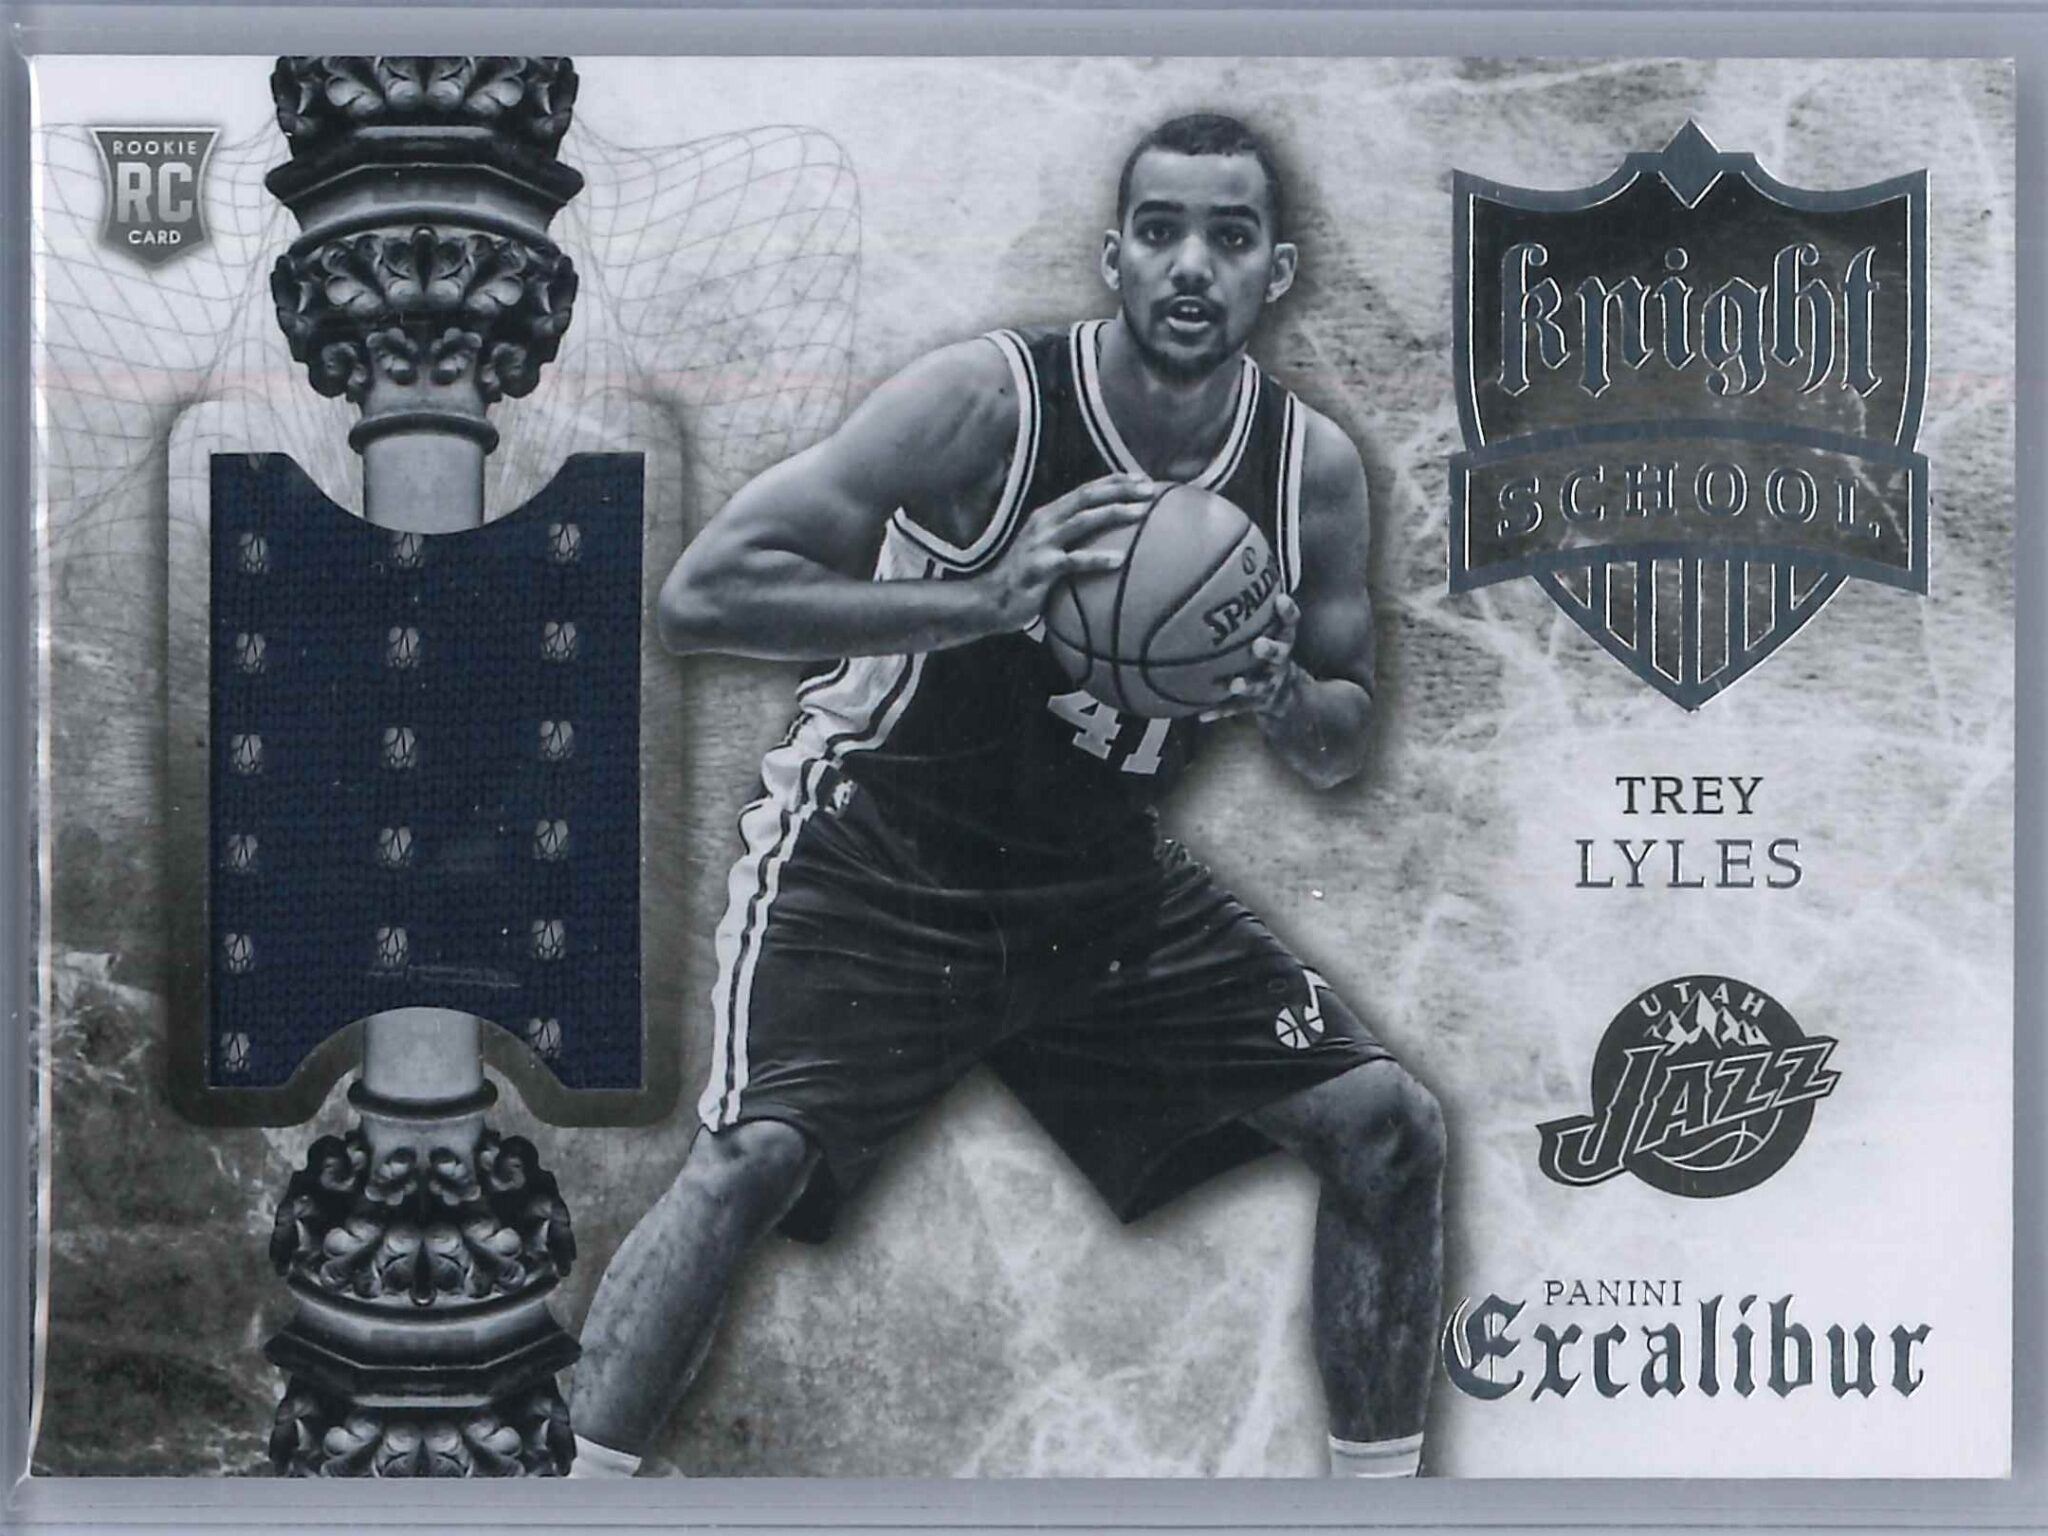 Trey Lyles Panini Excalibur 2015 16 Knight School RC Patch Rookie Patch 1 scaled